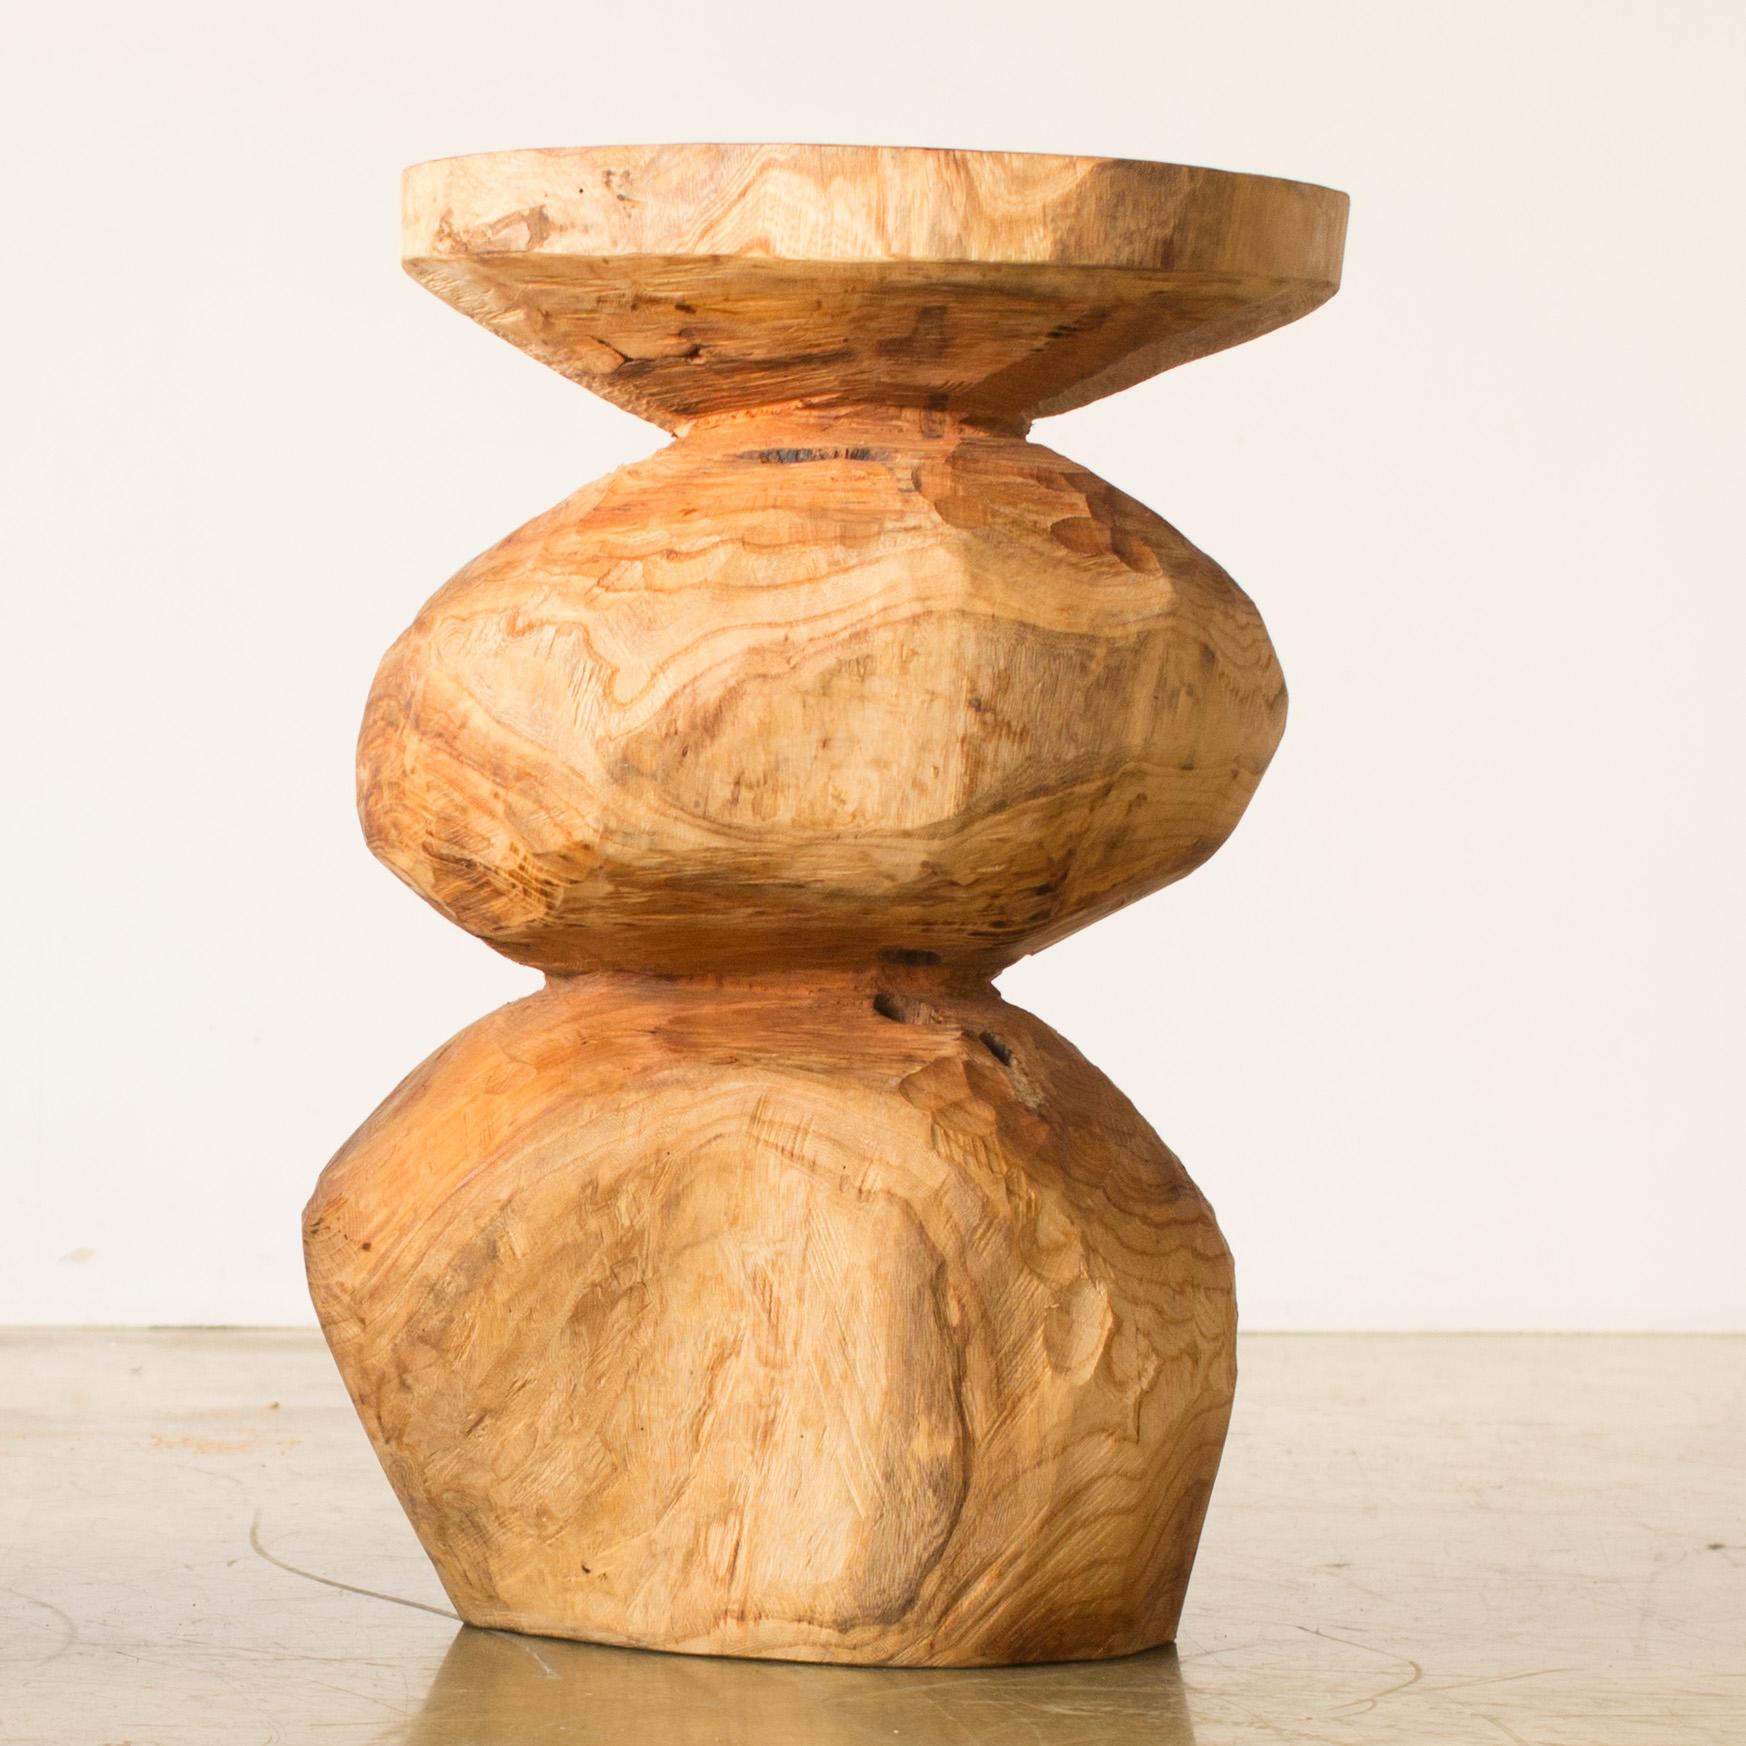 Name: Mamma
Sculptural stool by Hiroyuki Nishimura and zone carved furniture
Material: Zelkova
This work is carved from log with some kinds of chainsaws.
Most of wood used for Nishimura's works are unable to use anything, these woods are unsuitable